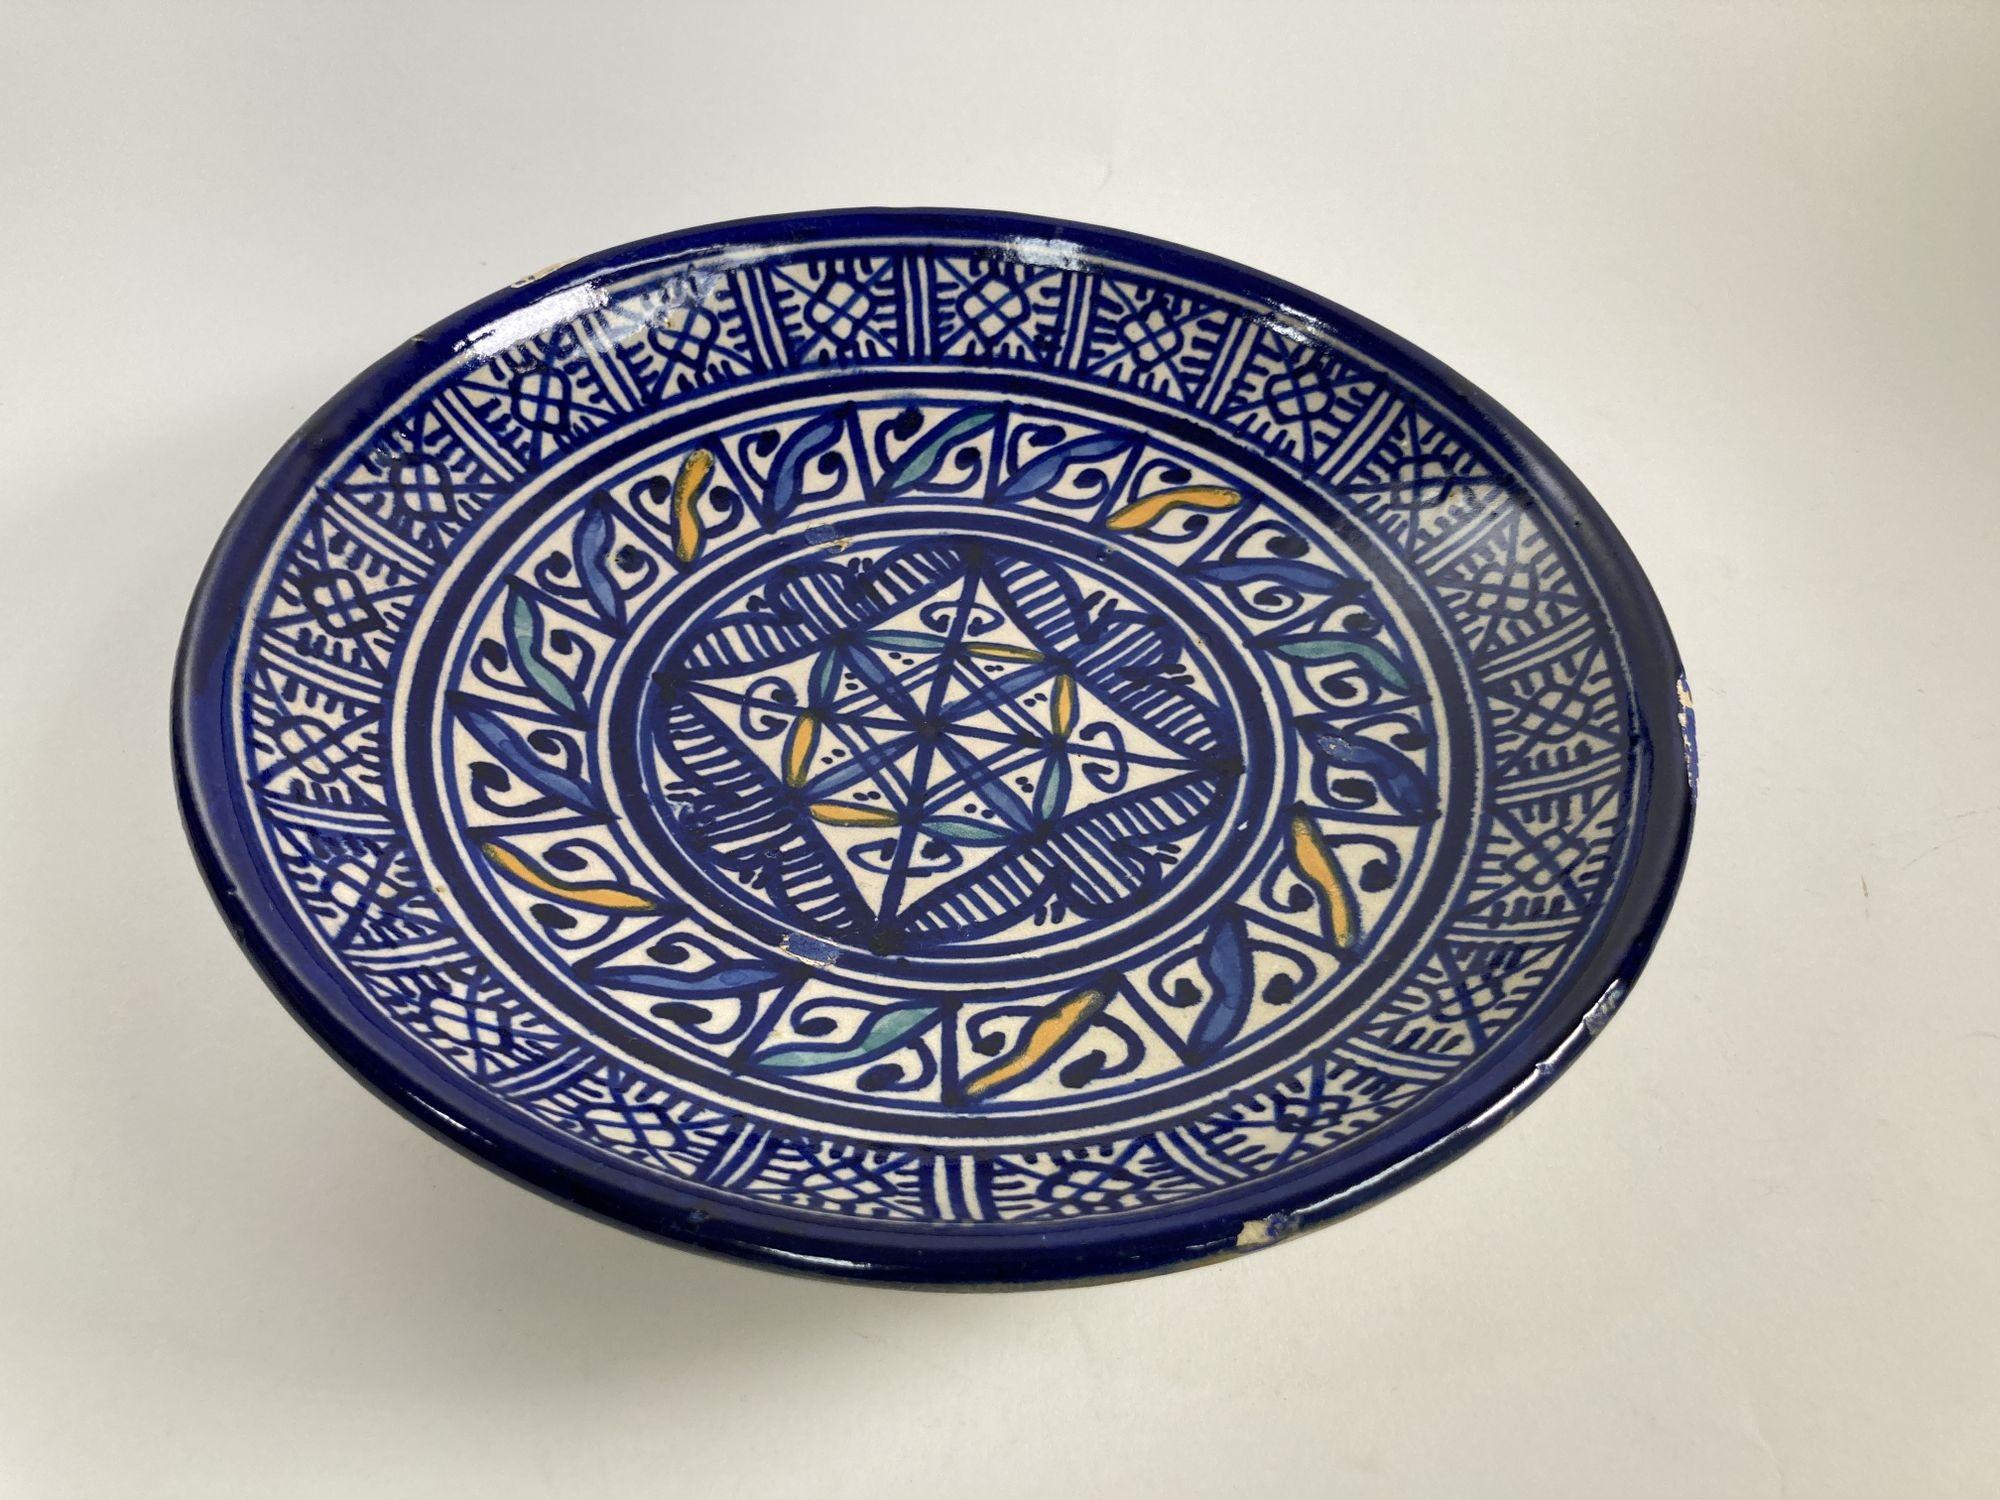 Early 20th century blue Moroccan Ceramic plate hand made in Fez.
Handcrafted and glazed decorative ceramic bowl from Fez, Morocco.
Featuring an elaborate hand-painted Moorish pattern in blue and white with some yellow accents.
One-of-a-kind antique